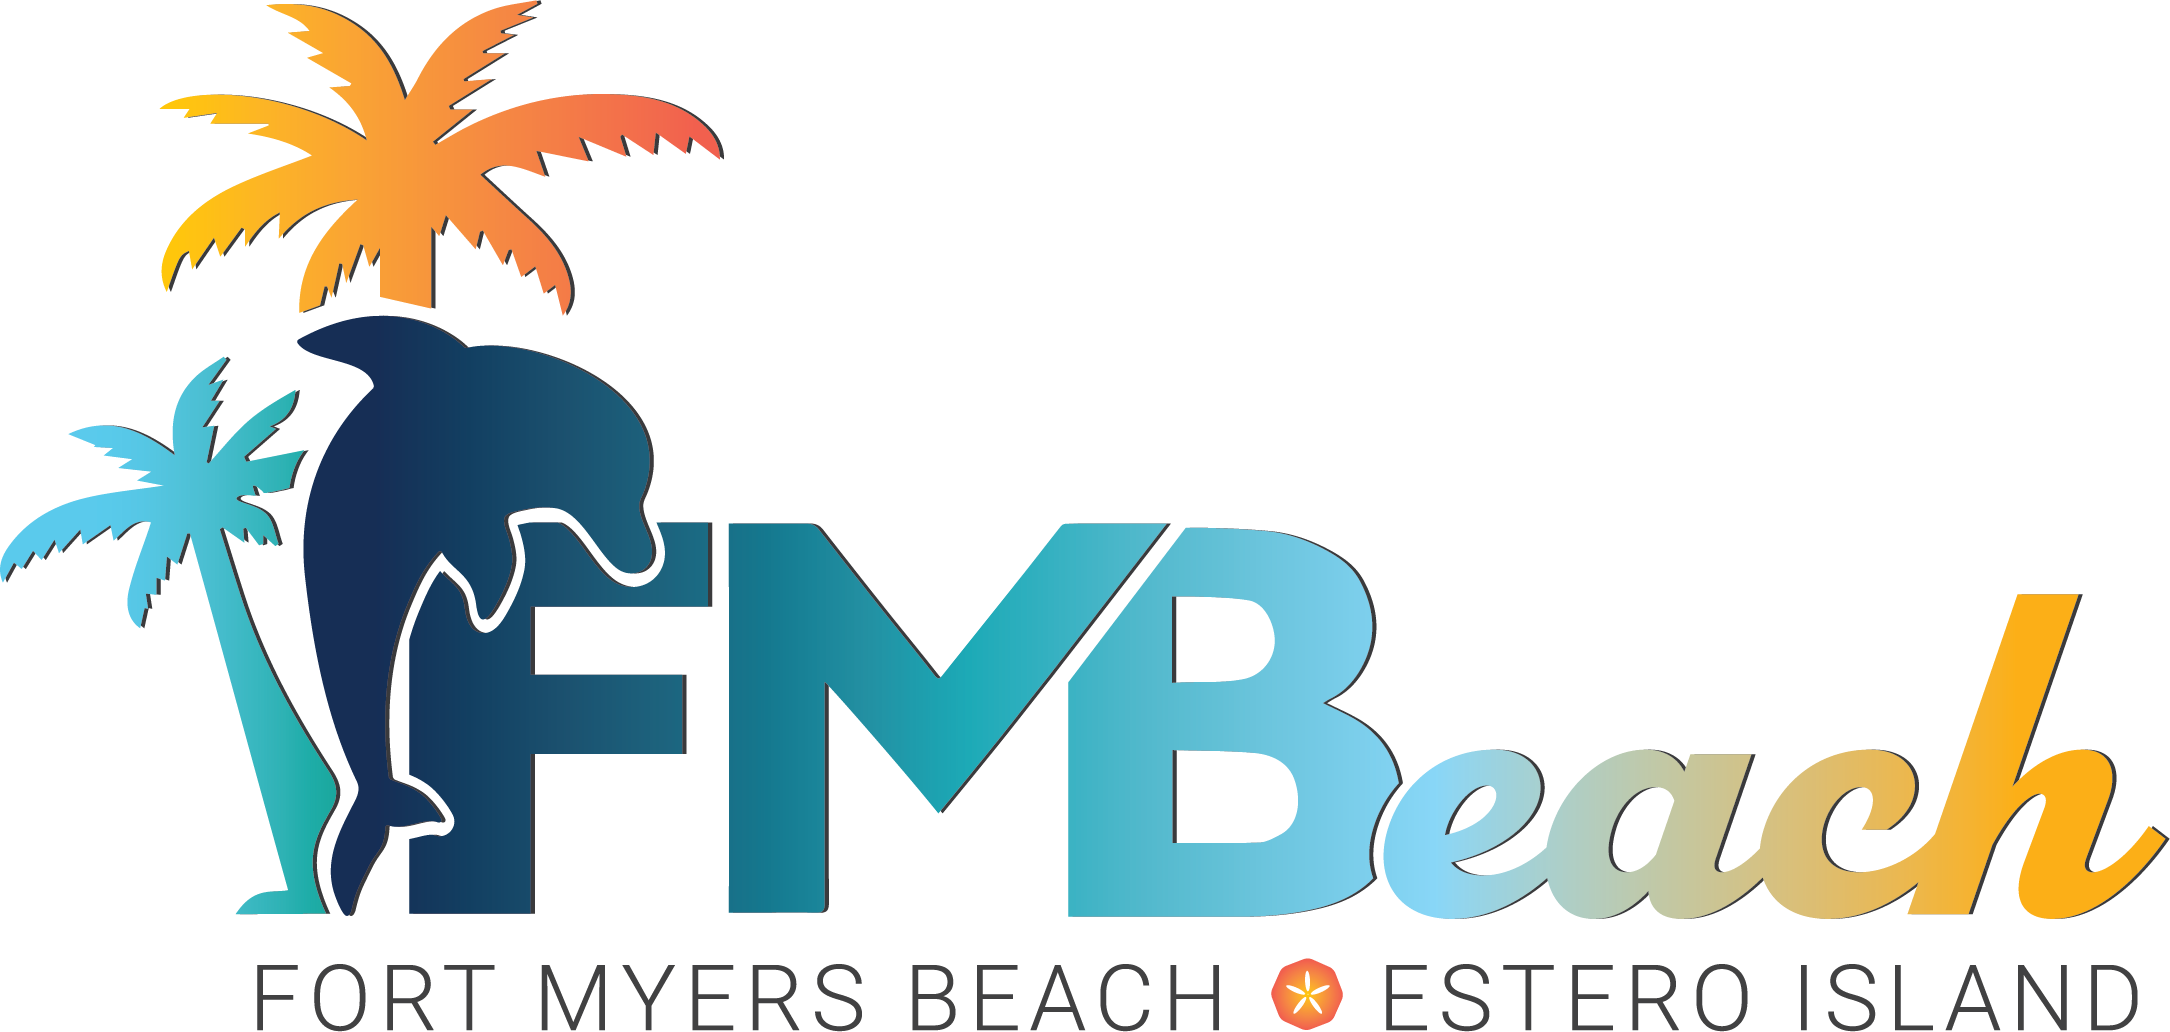 Fort Myers Beach color logo horizontal CMYK for print.png